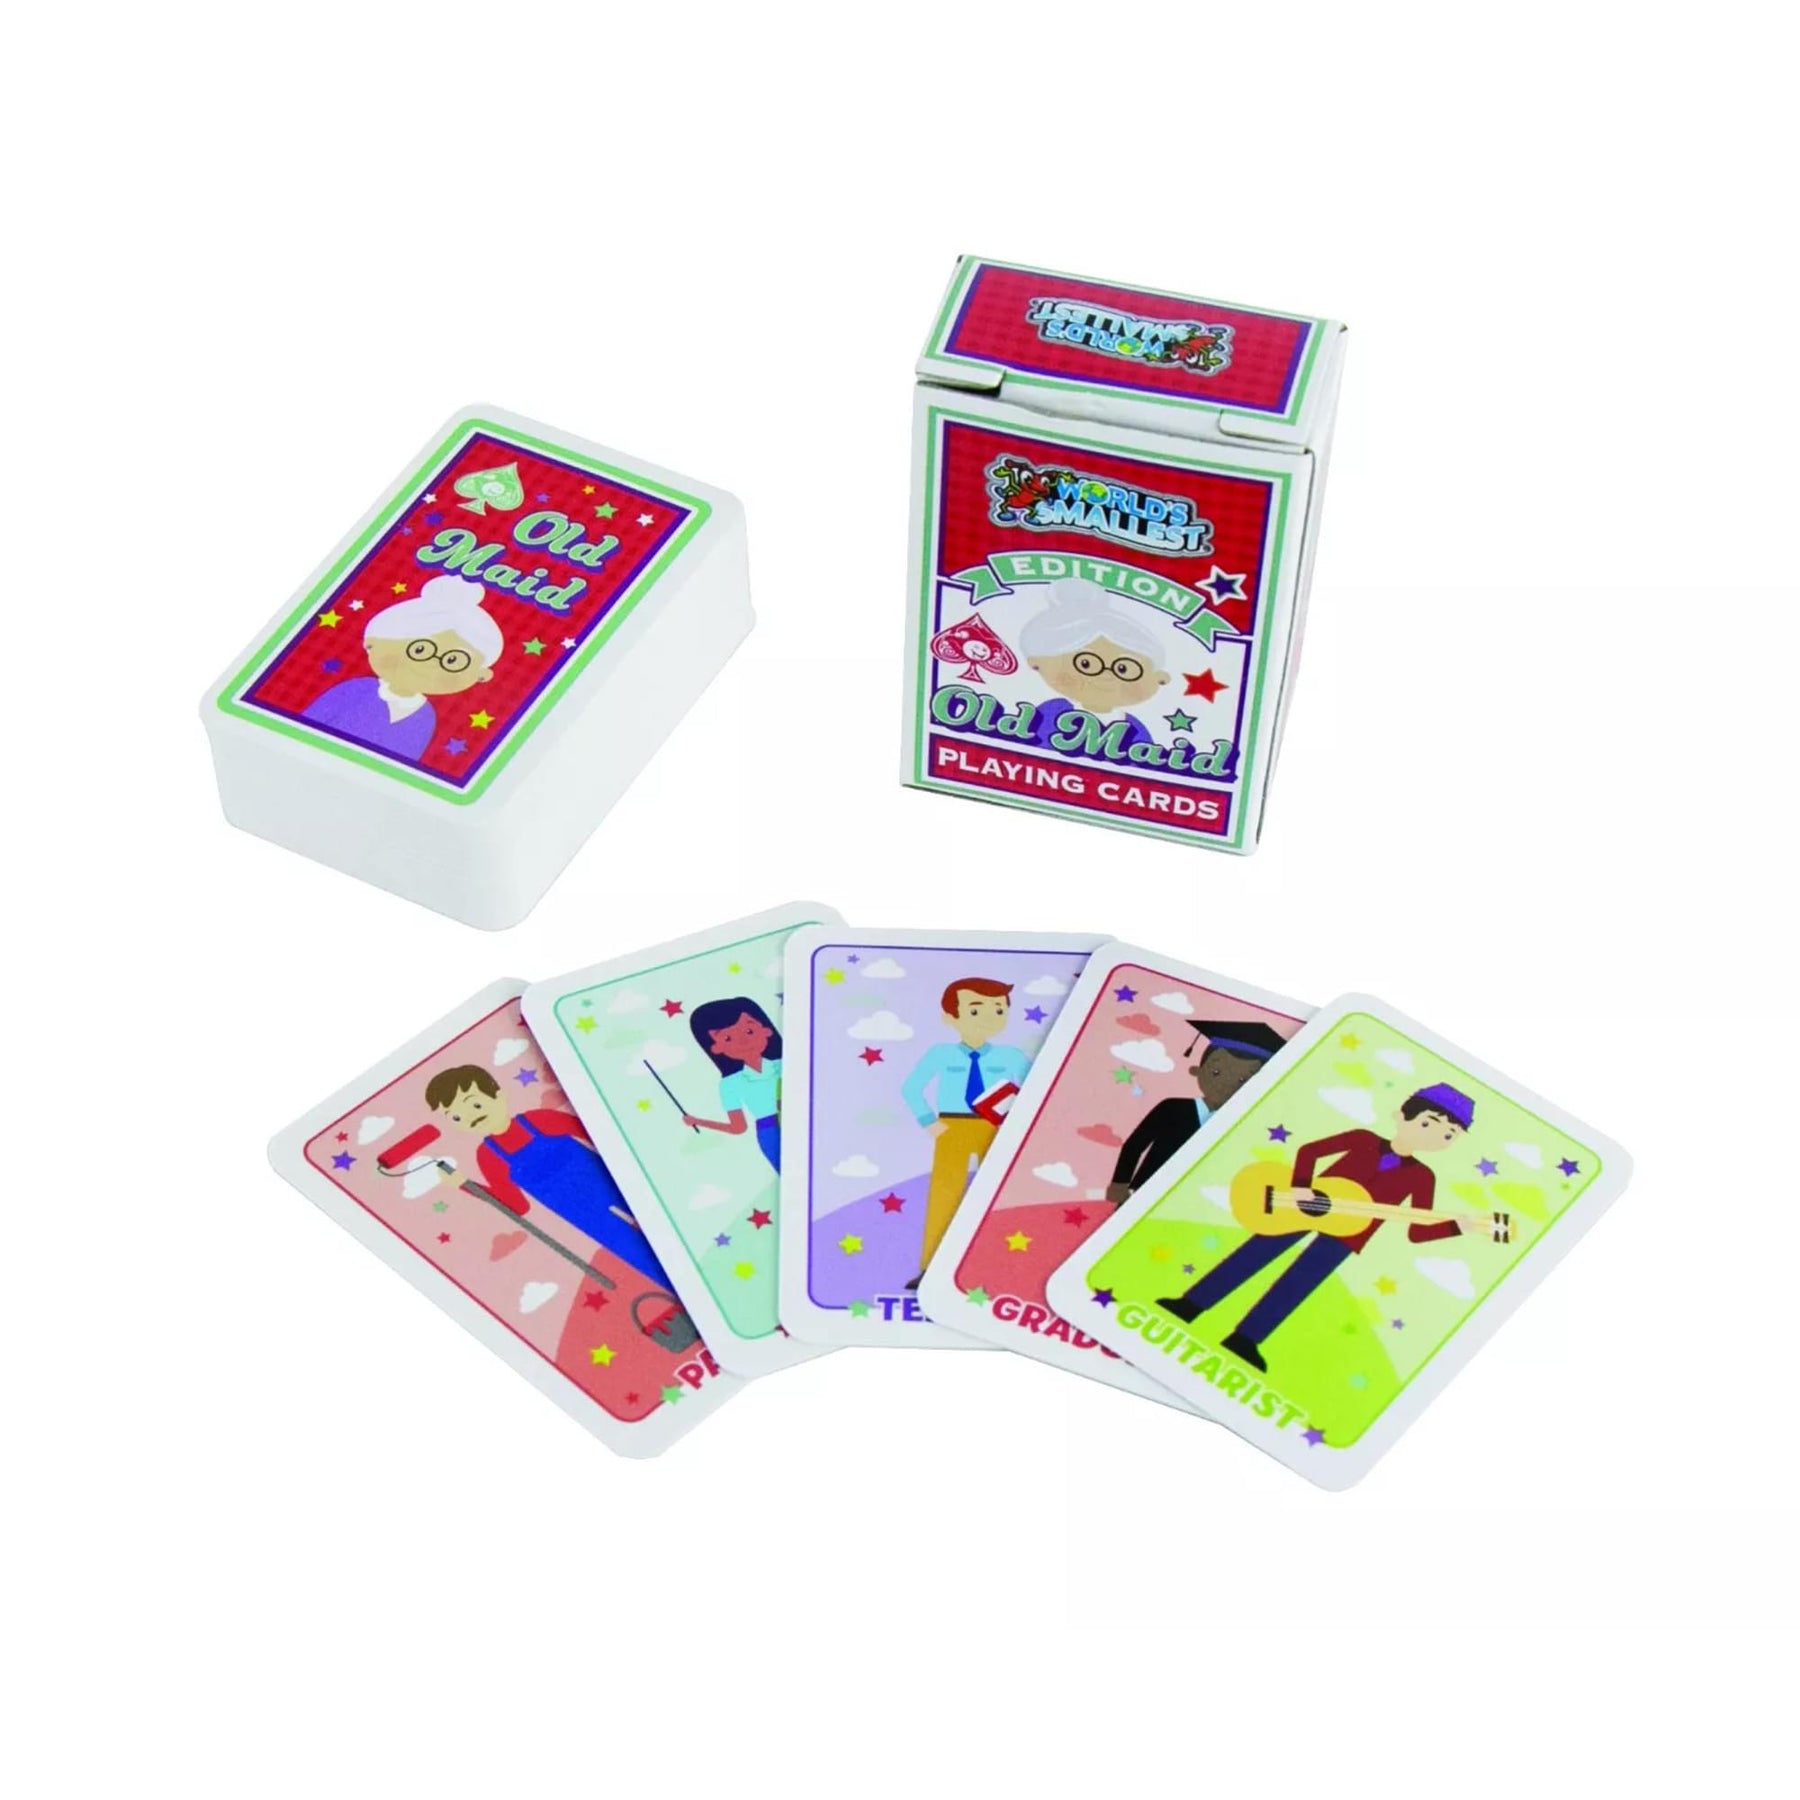 World's Smallest Classic Card Game | Old Maid